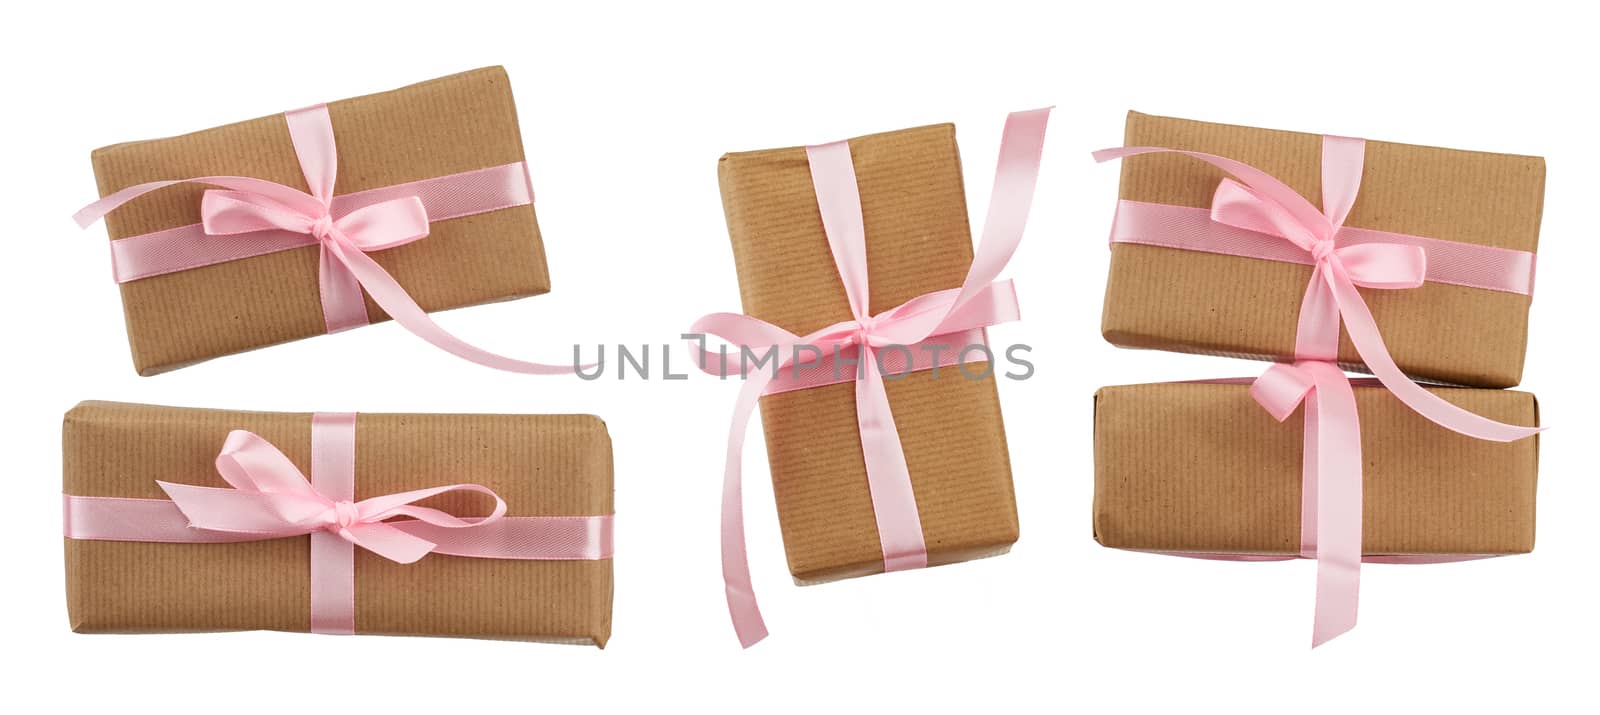 set of rectangular boxes wrapped in brown kraft paper and tied w by ndanko